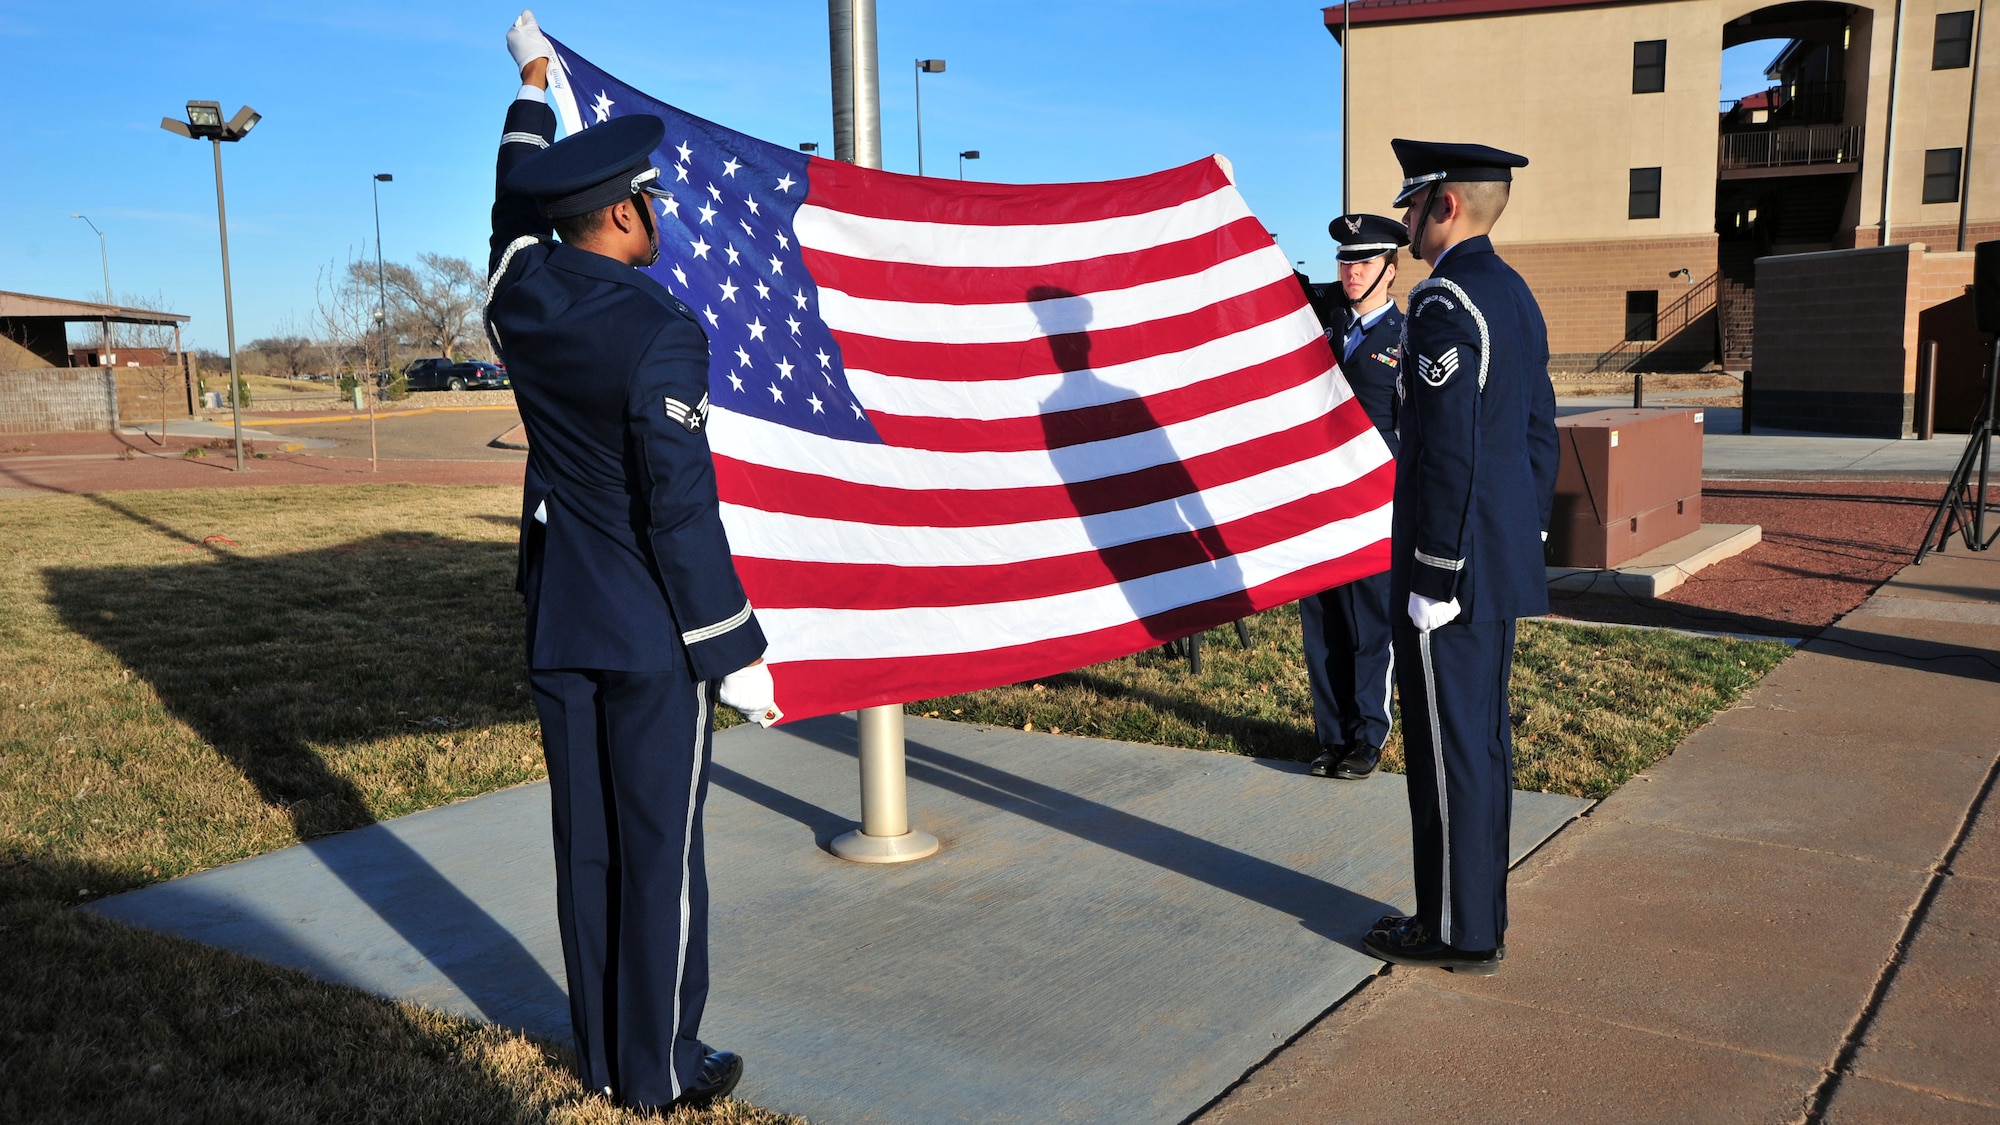 Honor guardsmen from the 27th Special Operations Wing prepare to fold the flag during a memorial ceremony Feb. 18, 2014 at Cannon Air Force Base, N.M. The ceremony was conducted in honor of Capt. Ryan Hall, Capt. Nicholas Whitlock, 1st Lt. Justin Wilkens and Senior Airman Julian Scholten, the aircrew members who lost their lives when “Ratchet 33”, a U-28A, crashed in Djibouti, Africa, Feb. 18, 2012. (U.S. Air Force photo/Senior Airman Whitney Amstutz)